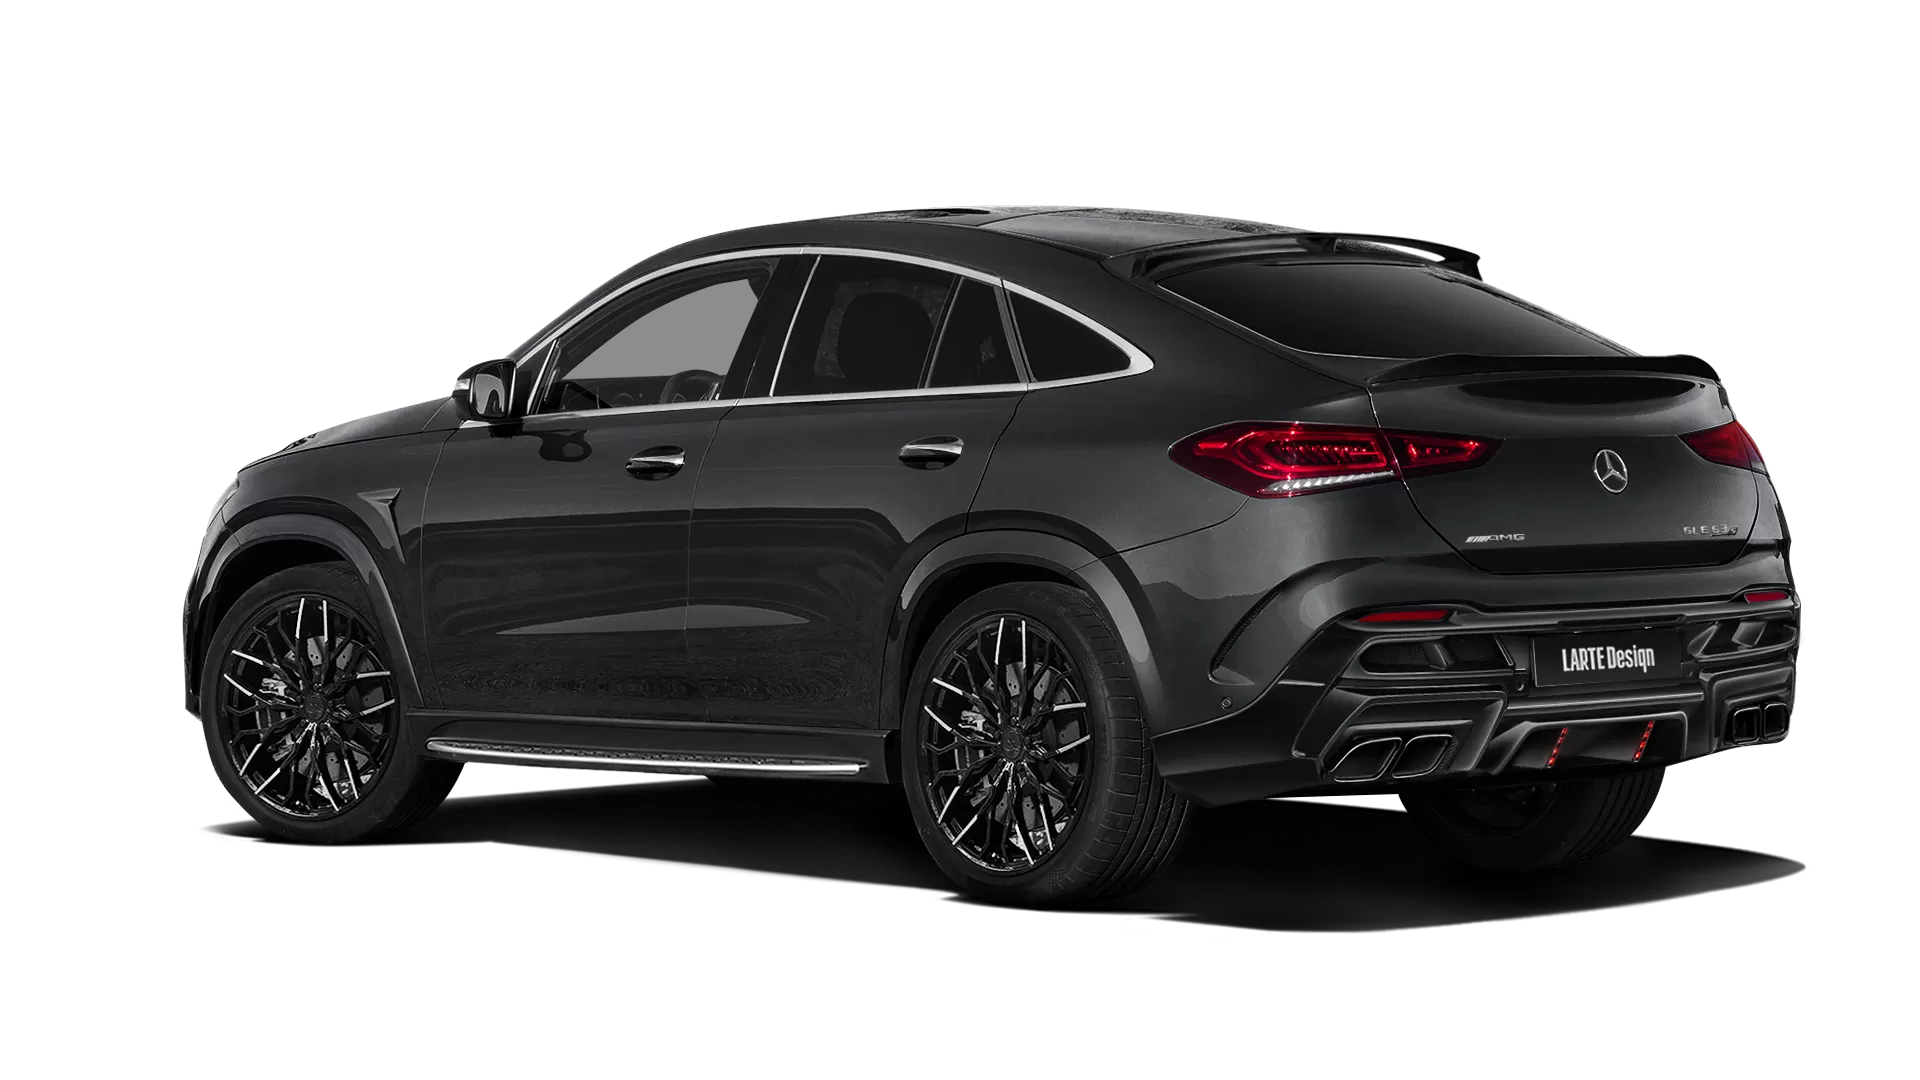 Mercedes GLE Coupe AMG 63 C167 with painted body kit: rear view shown in Obsidian Black